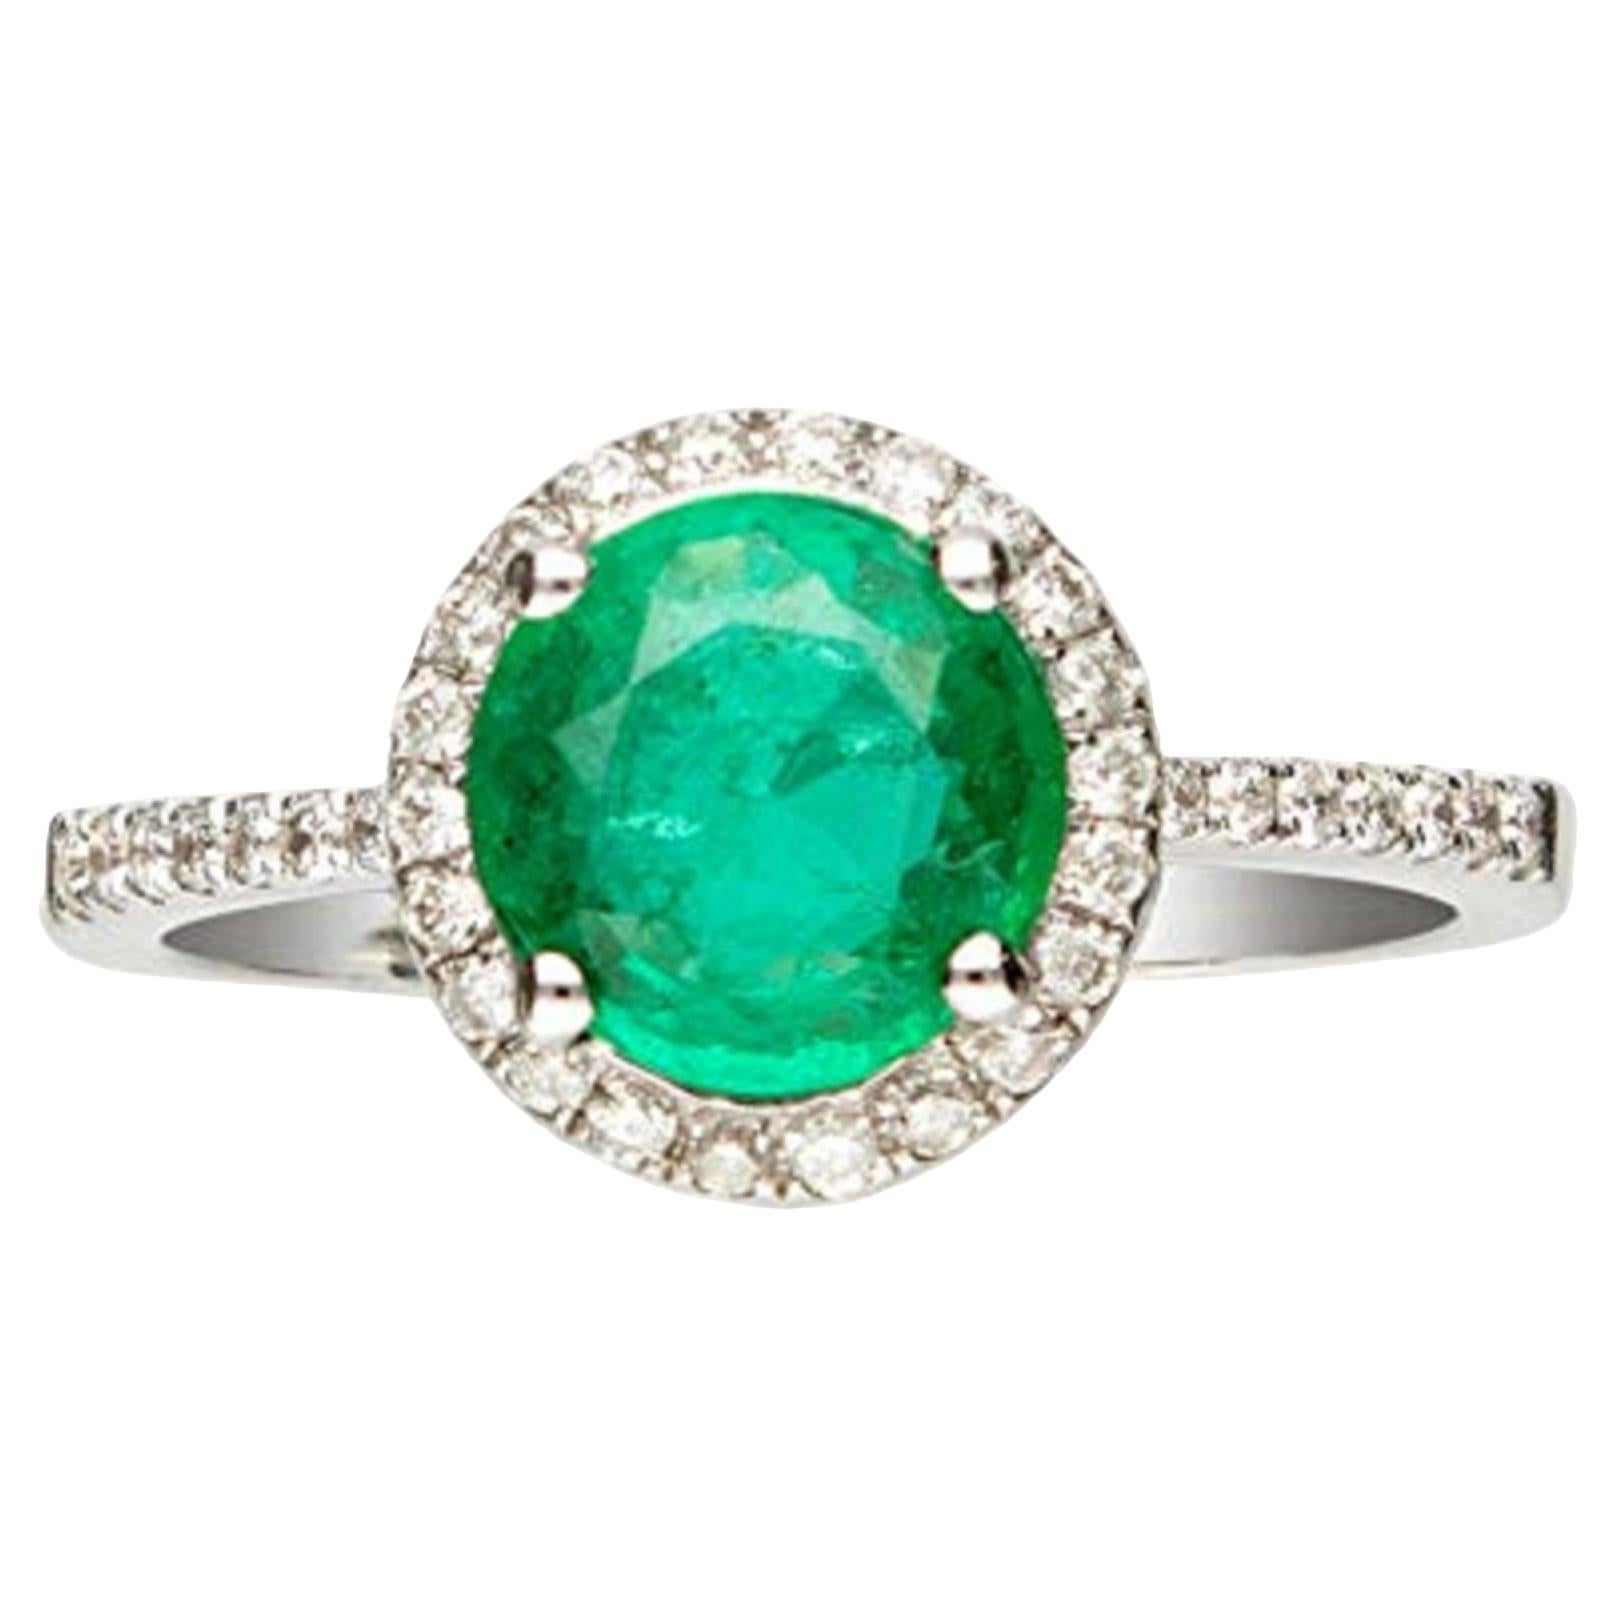  18K White Gold Natural Zambian Emerald Ring with Natural Diamonds for Women